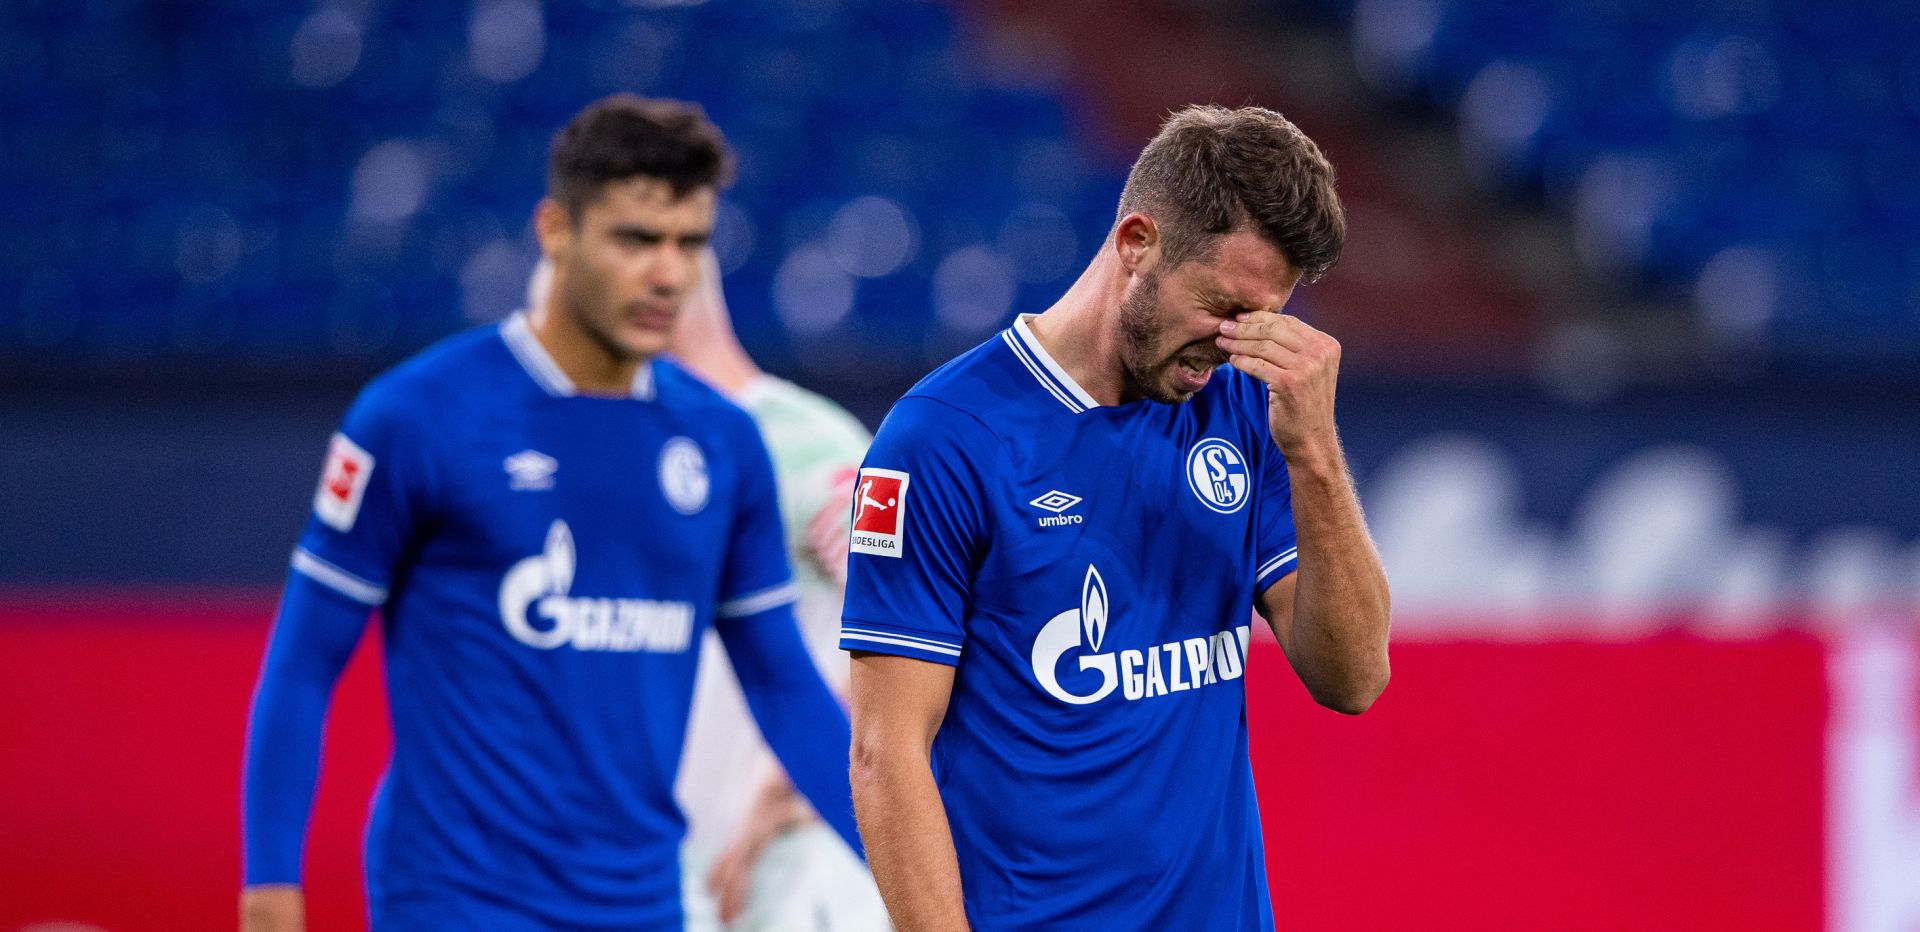 26 September 2020, North Rhine-Westphalia, Gelsenkirchen: Schalke's Mark Uth reacts in frustration during the German Bundesliga soccer match between FC Schalke 04 and Werder Bremen at the Veltins Arena. Photo: Guido Kirchner/dpa - IMPORTANT NOTICE: DFL and DFB regulations prohibit any use of photographs as image sequences and/or quasi-video.